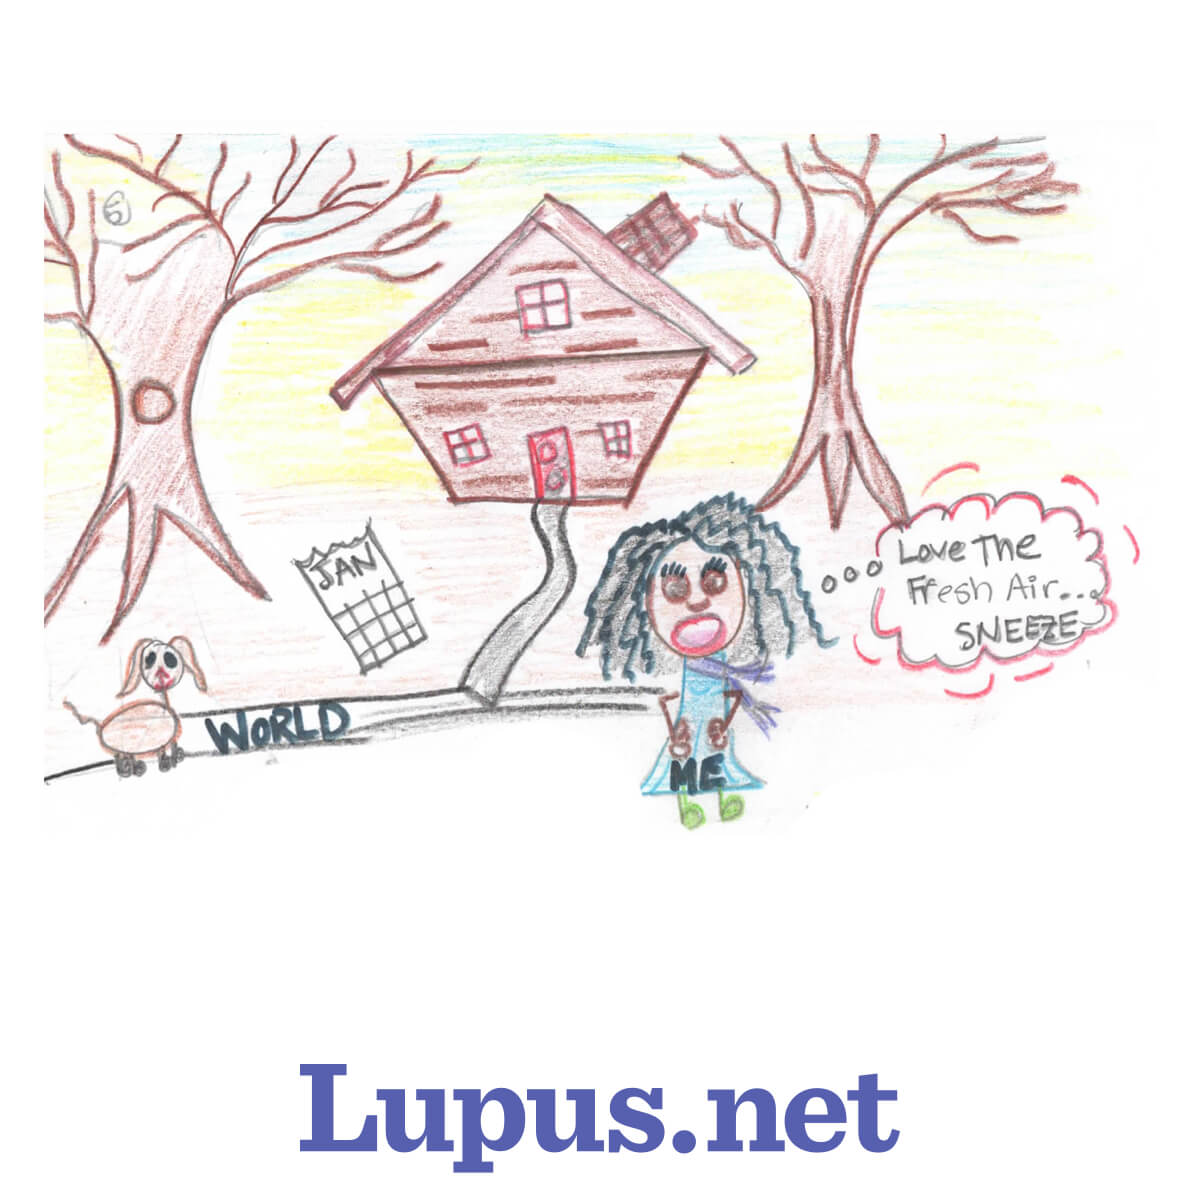 Living with lupus through the seasons comic, outside in January, sneezing